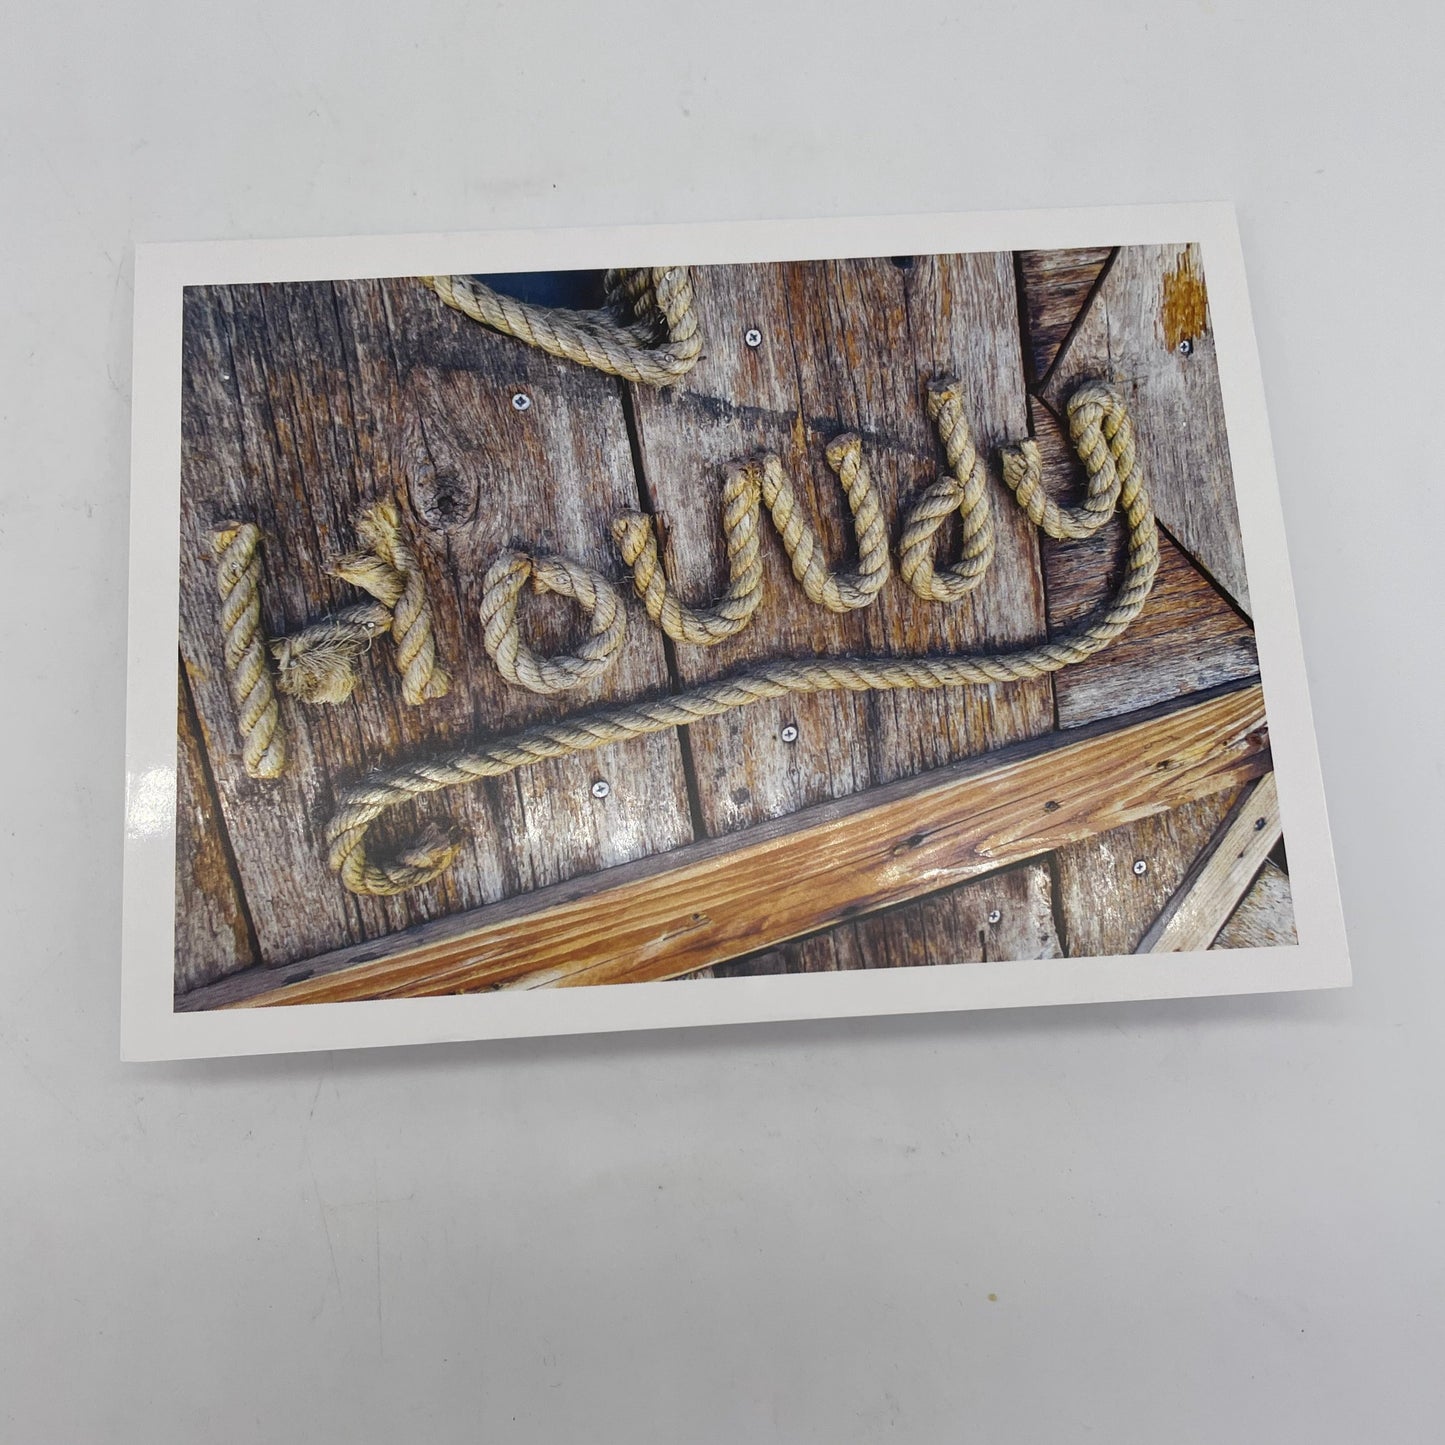 Rectangular greeting card with photograph of a wooden background and HOWDY written with rope.